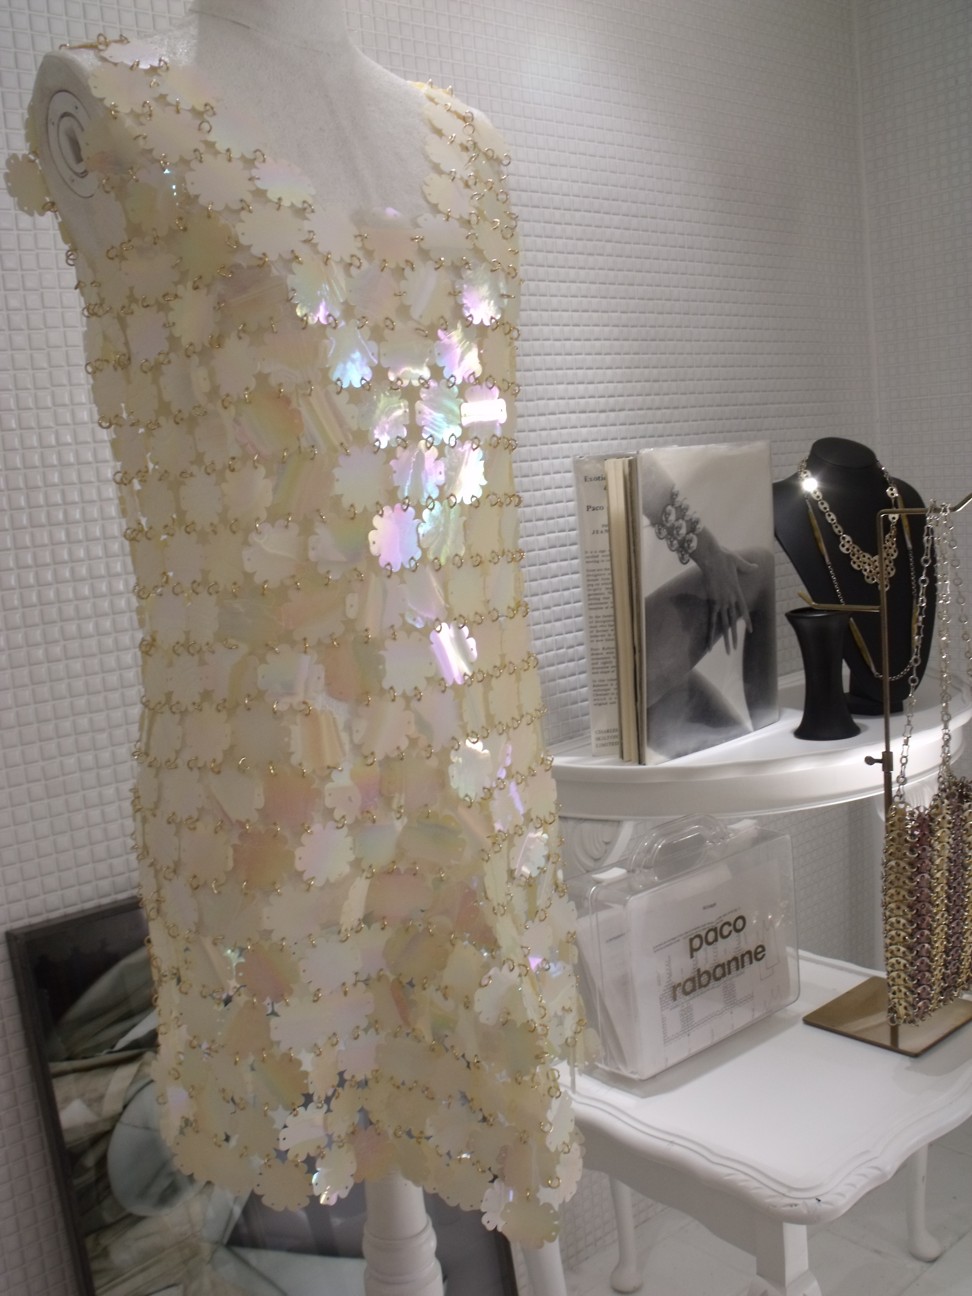 A vintage Paco Rabanne dress and accessories at Tokyo’s Laila Tokio.